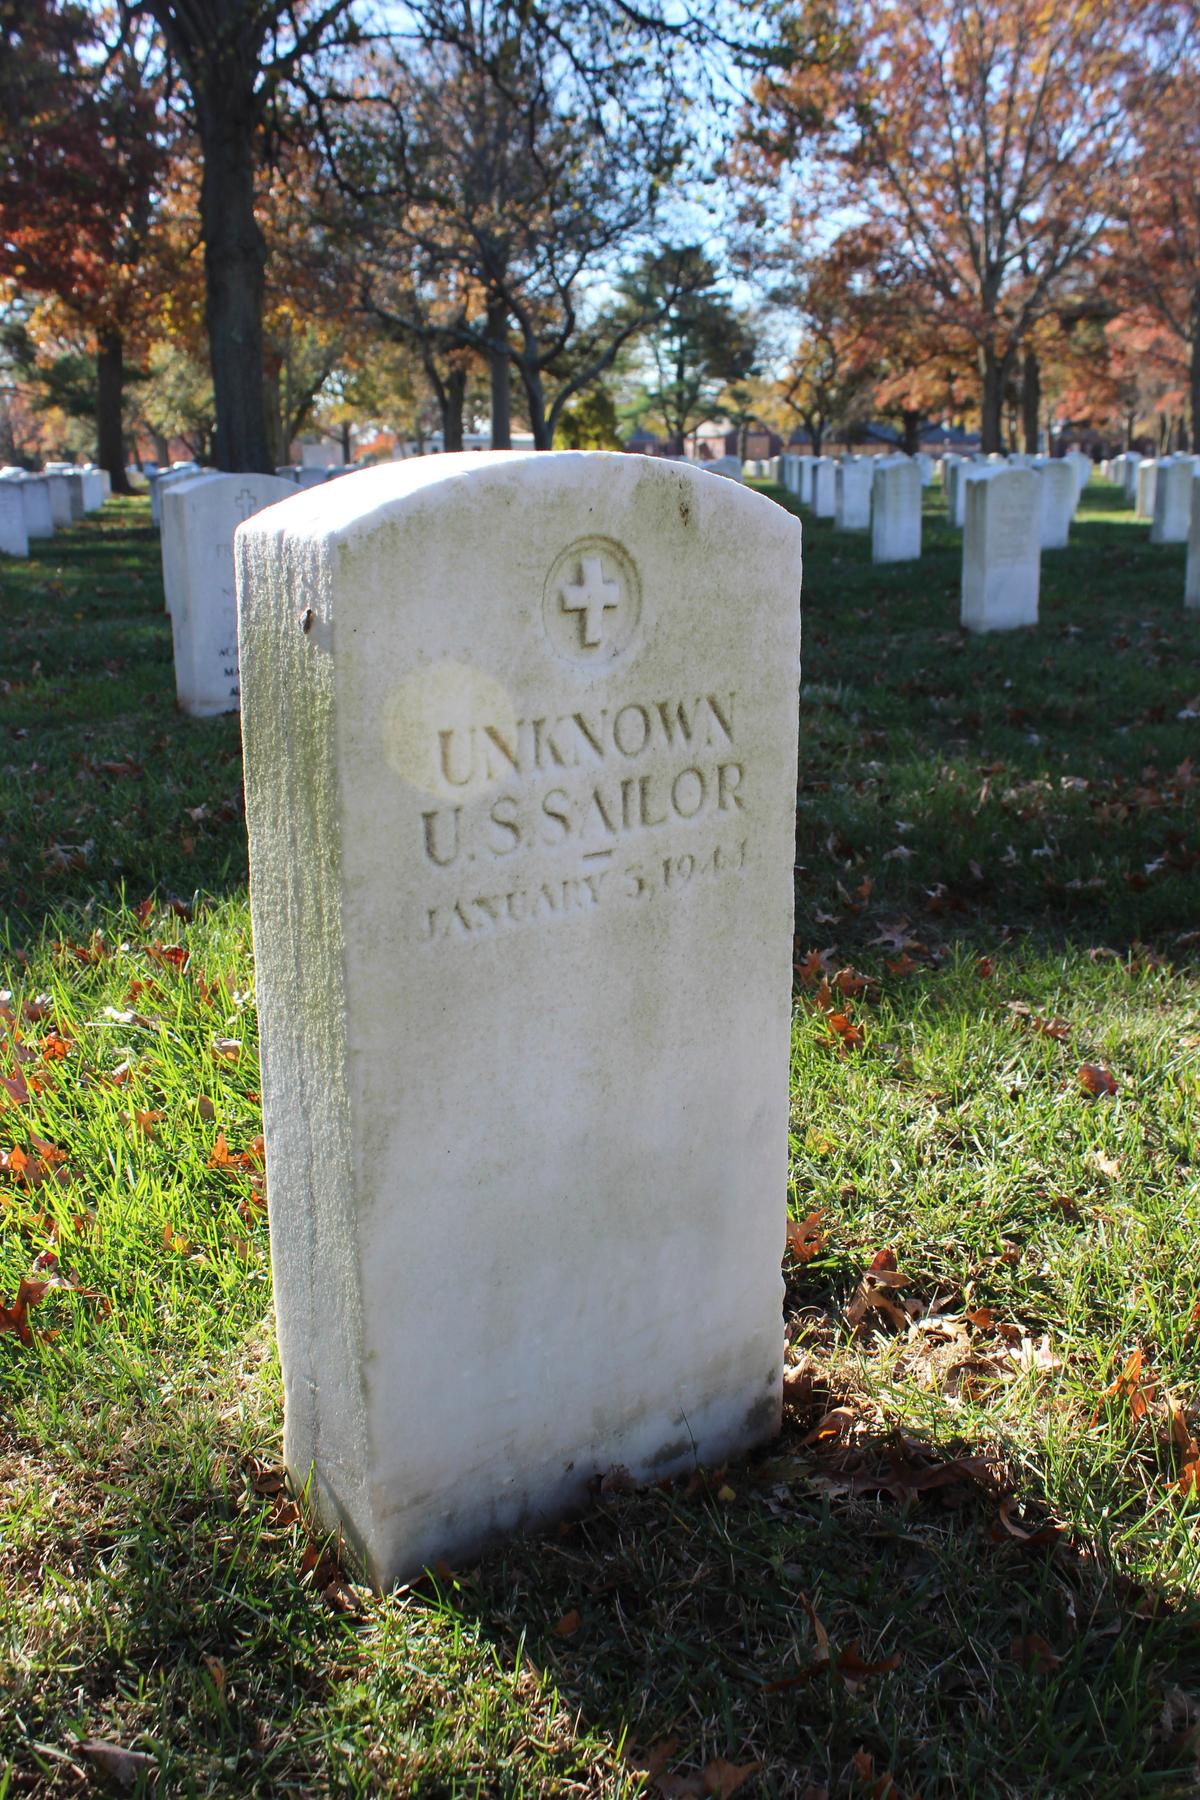 A gravestone with the inscription UNKNOWN U.S. SAILOR at Long Island National Cemetery in Farmingdale, N.Y. (AP Photo/Frank Eltman, File)